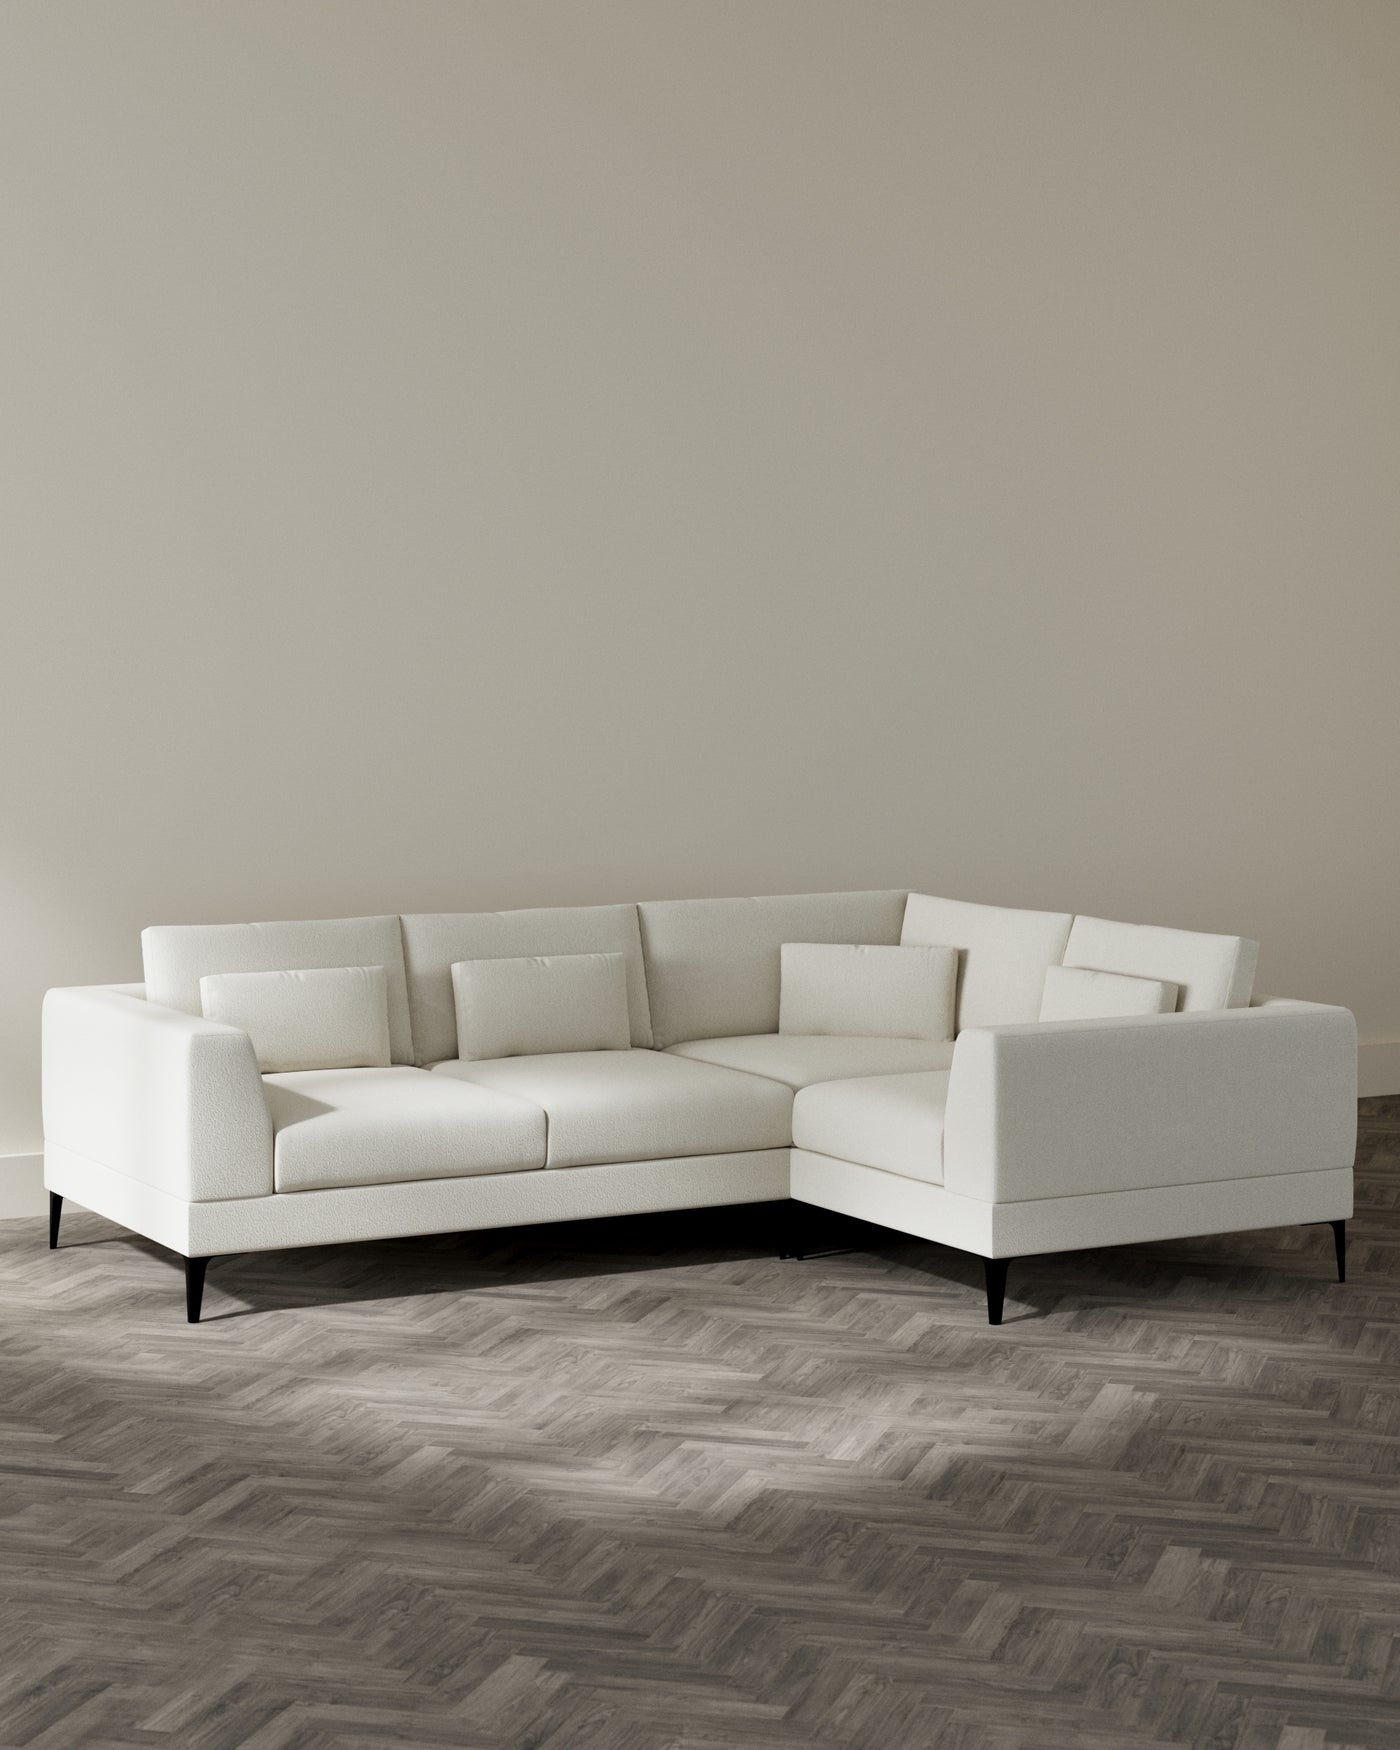 Modern L-shaped sectional sofa with a minimalist design, featuring a clean ivory upholstery and sleek black tapered legs. Perfect for contemporary living spaces.